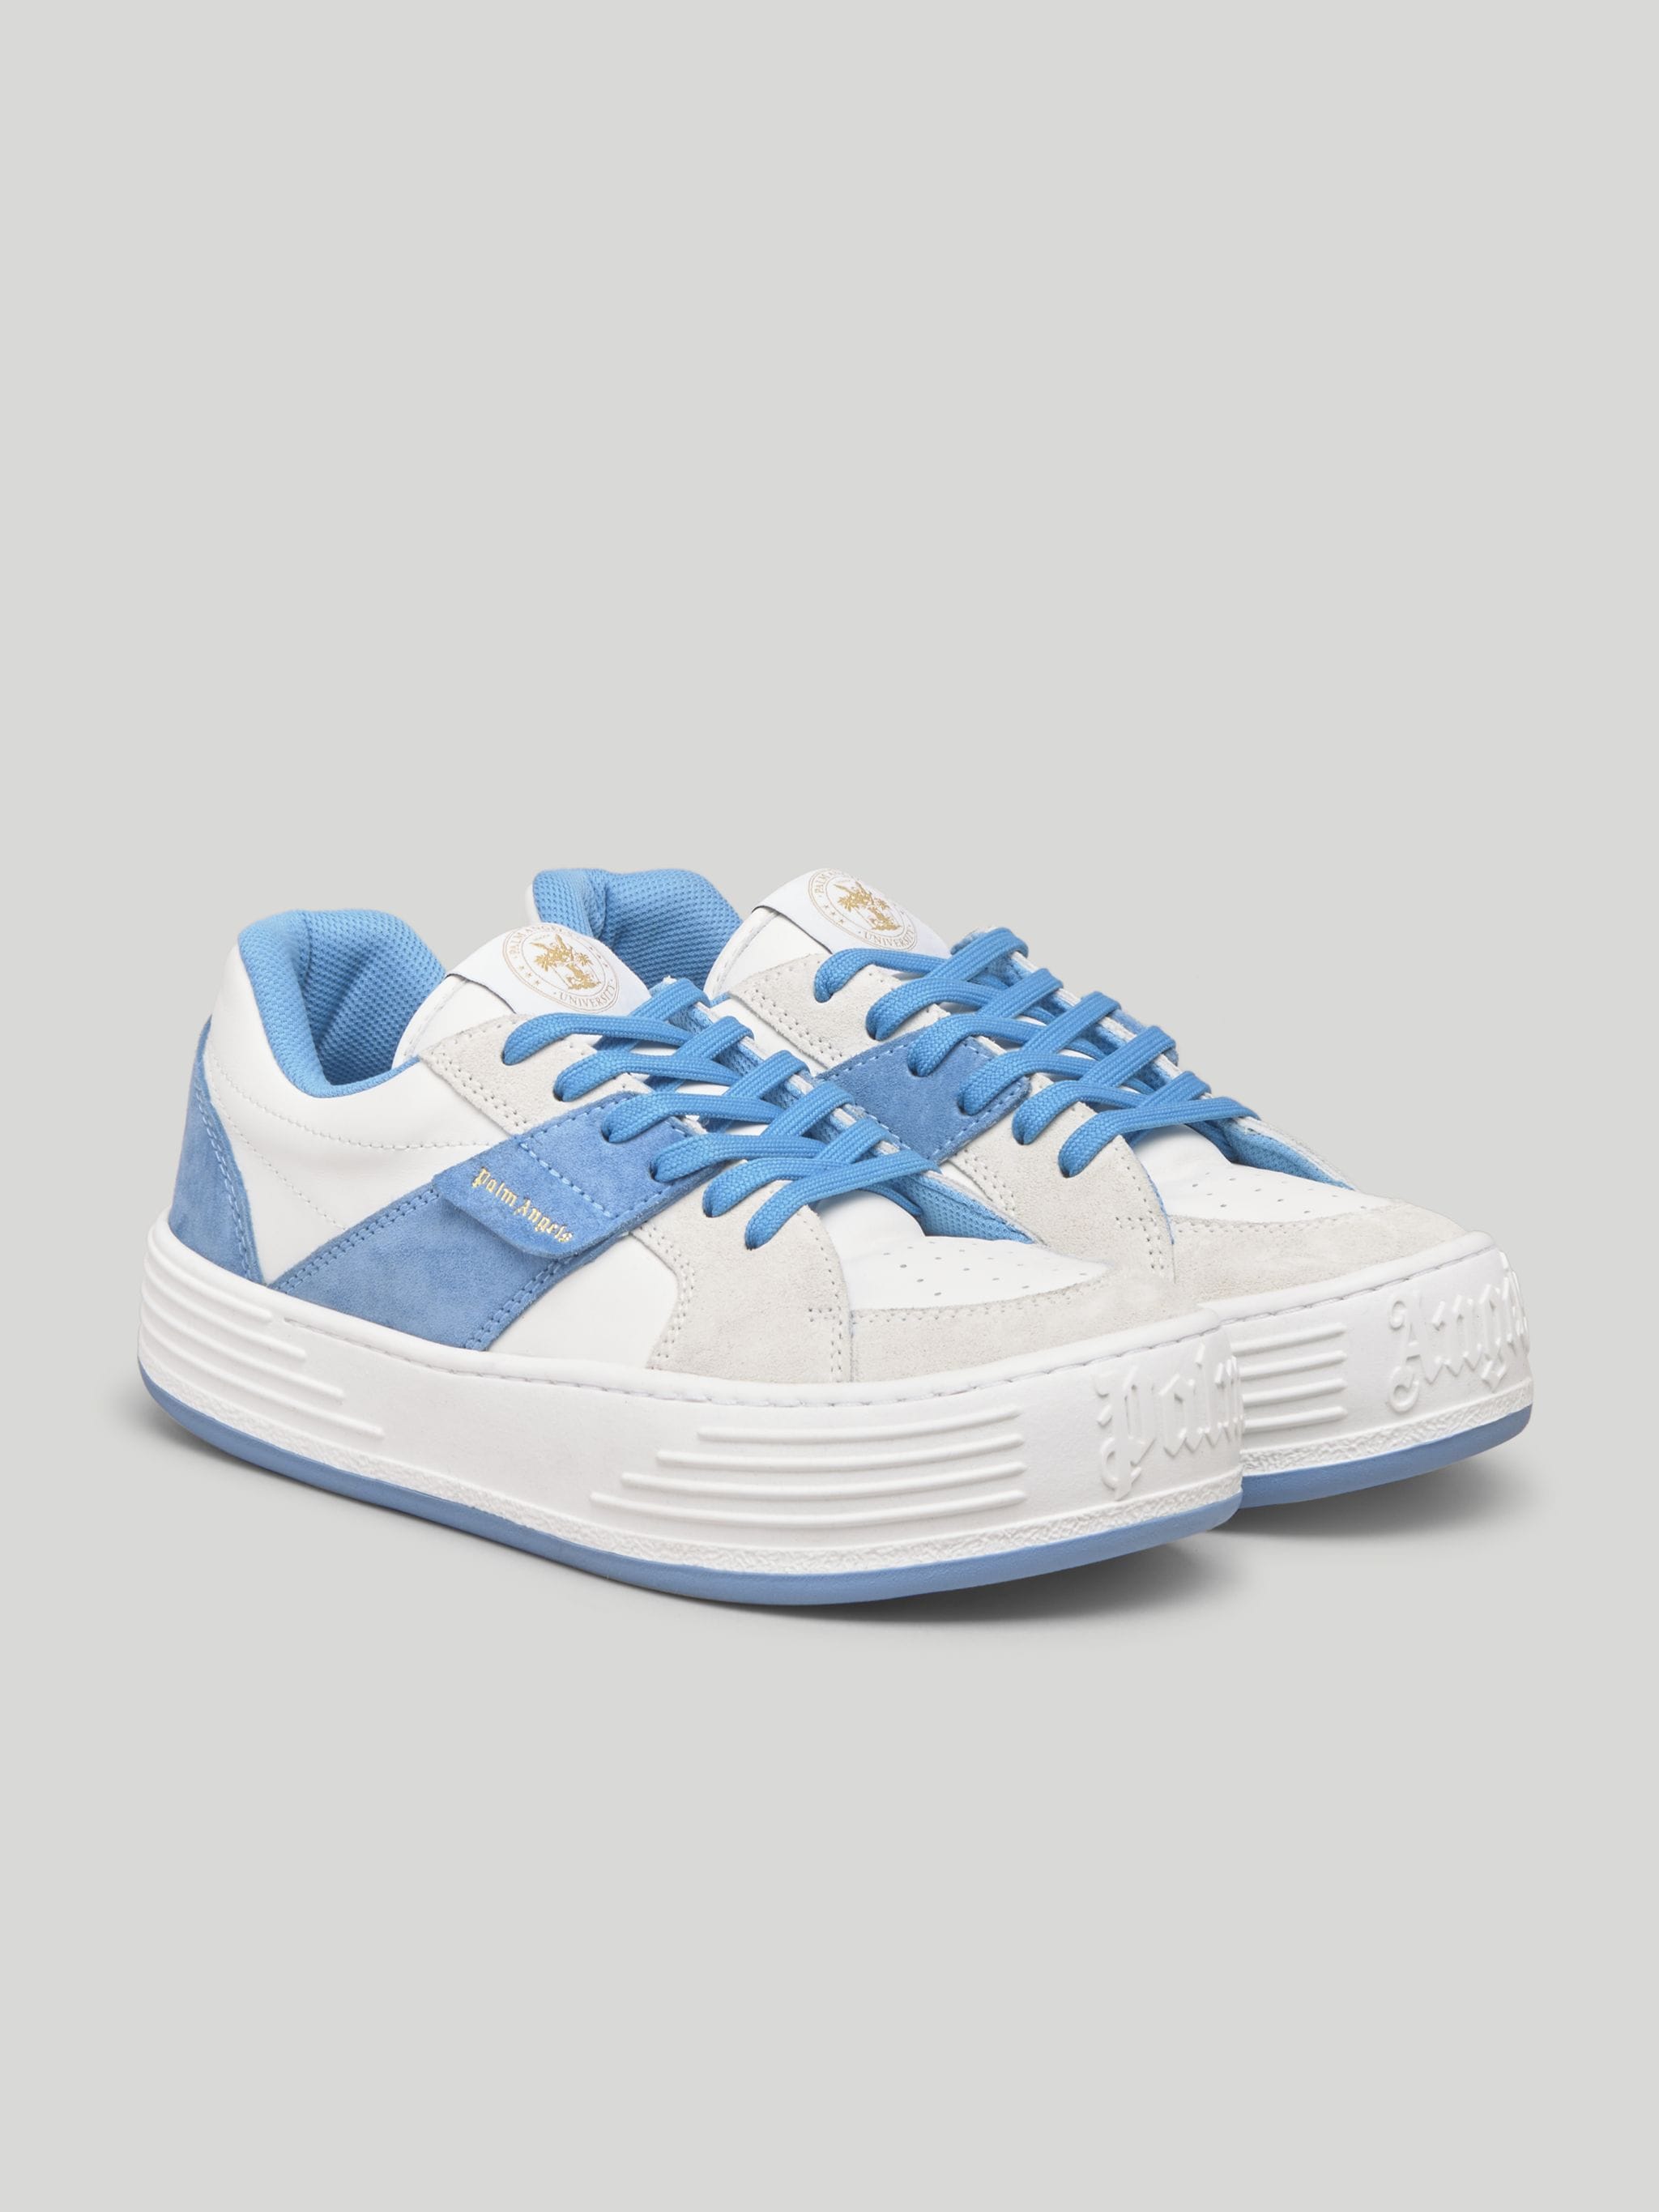 Men's Trainers & Sneakers Collection | Palm Angels® Official